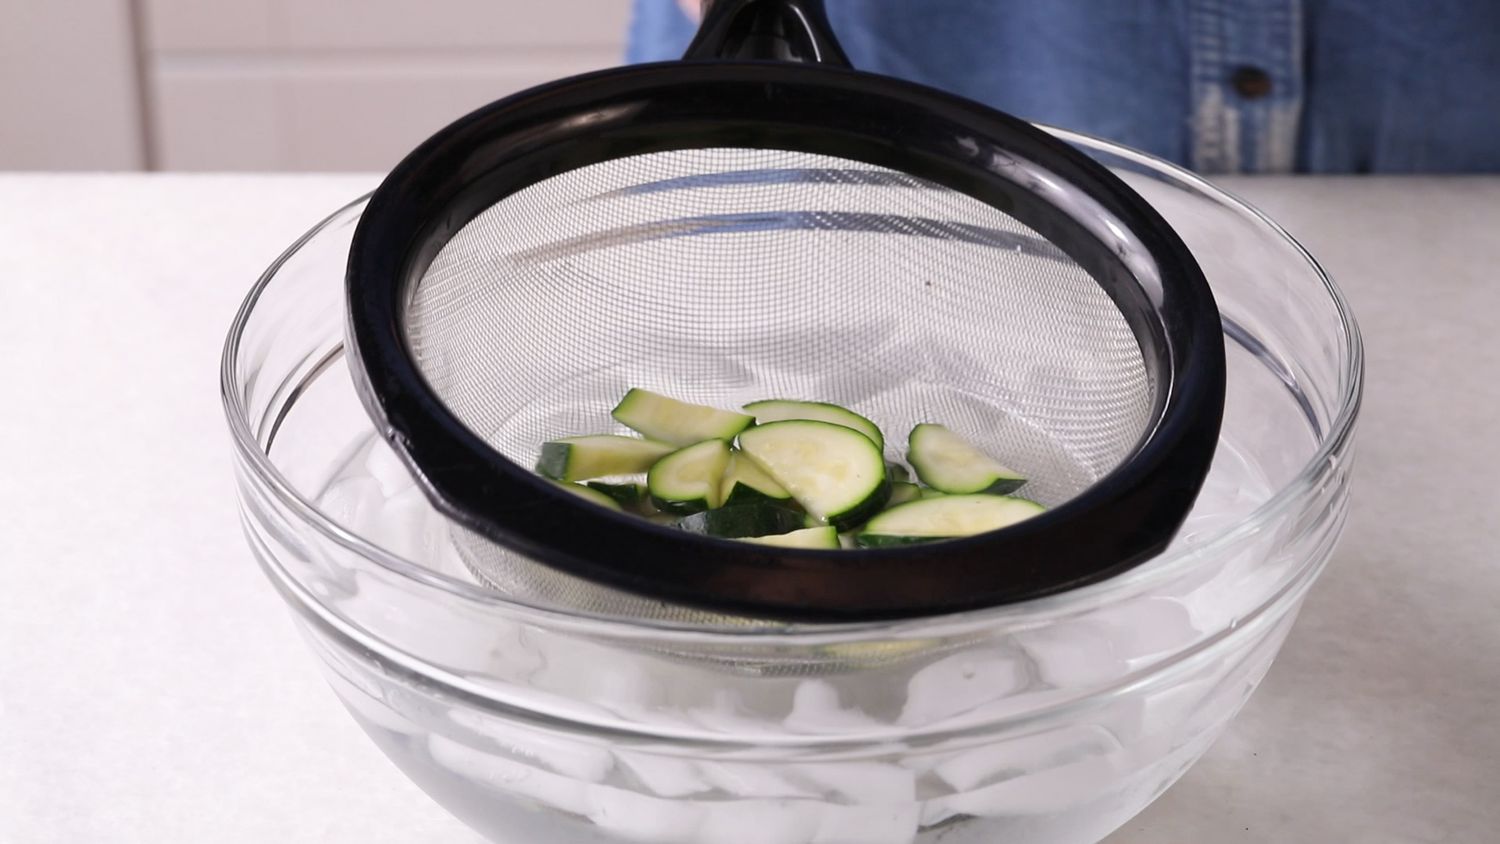 Dipping zucchini slices in ice water